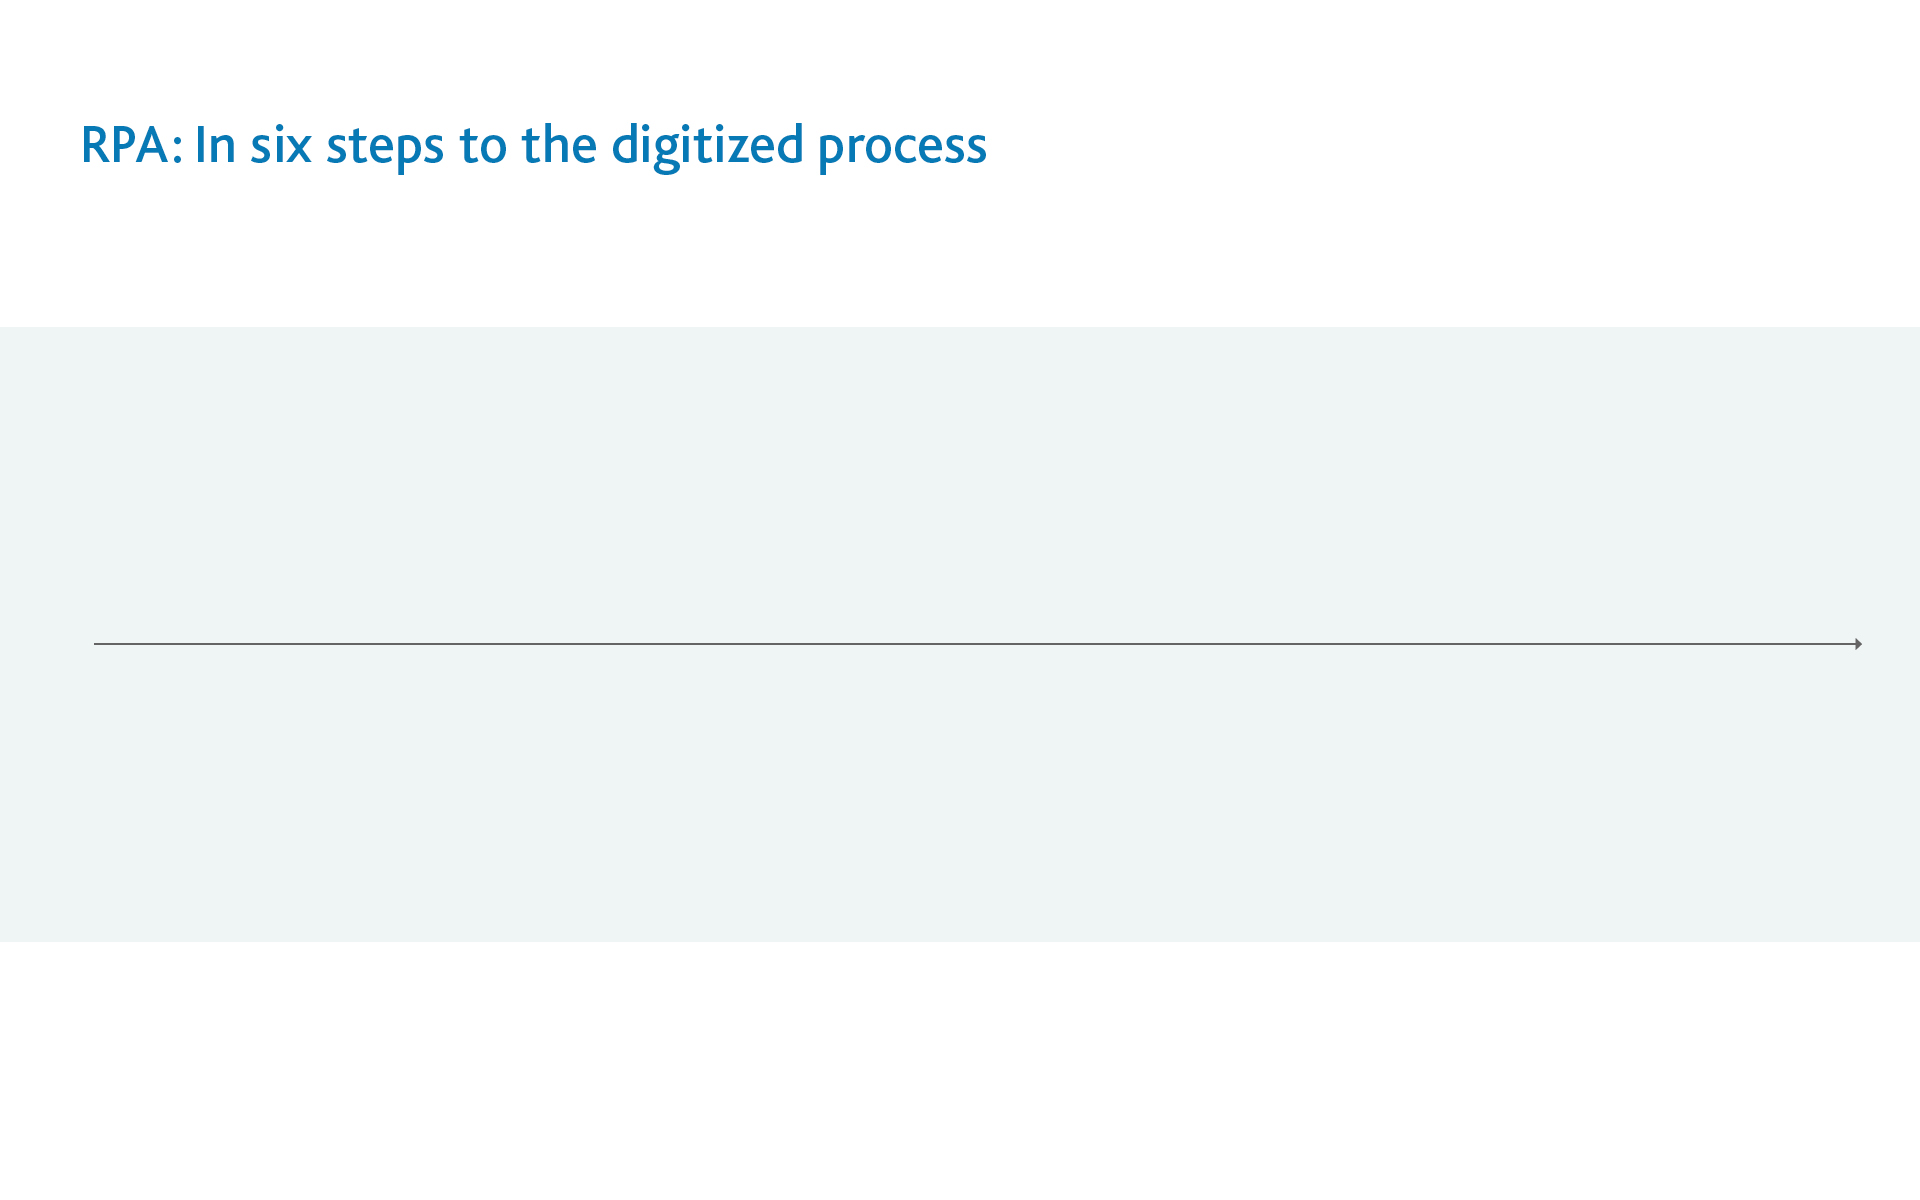 In six steps to the digitized process